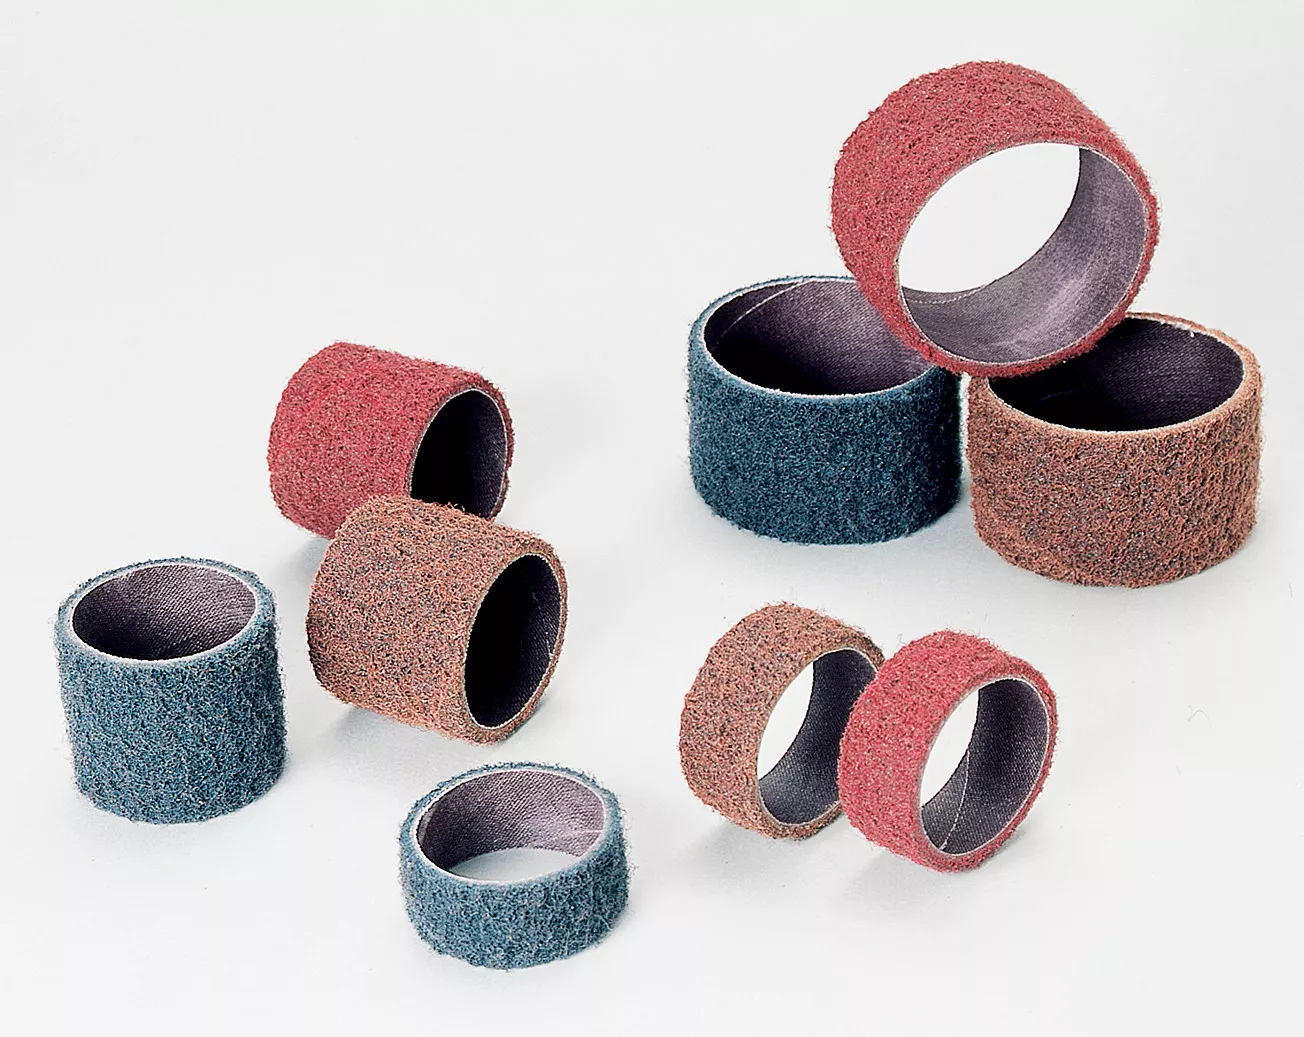 Standard Abrasives™ Surface Conditioning Band 727090, 1-1/2 in x 1 in
MED, 10/Carton, 100 ea/Case